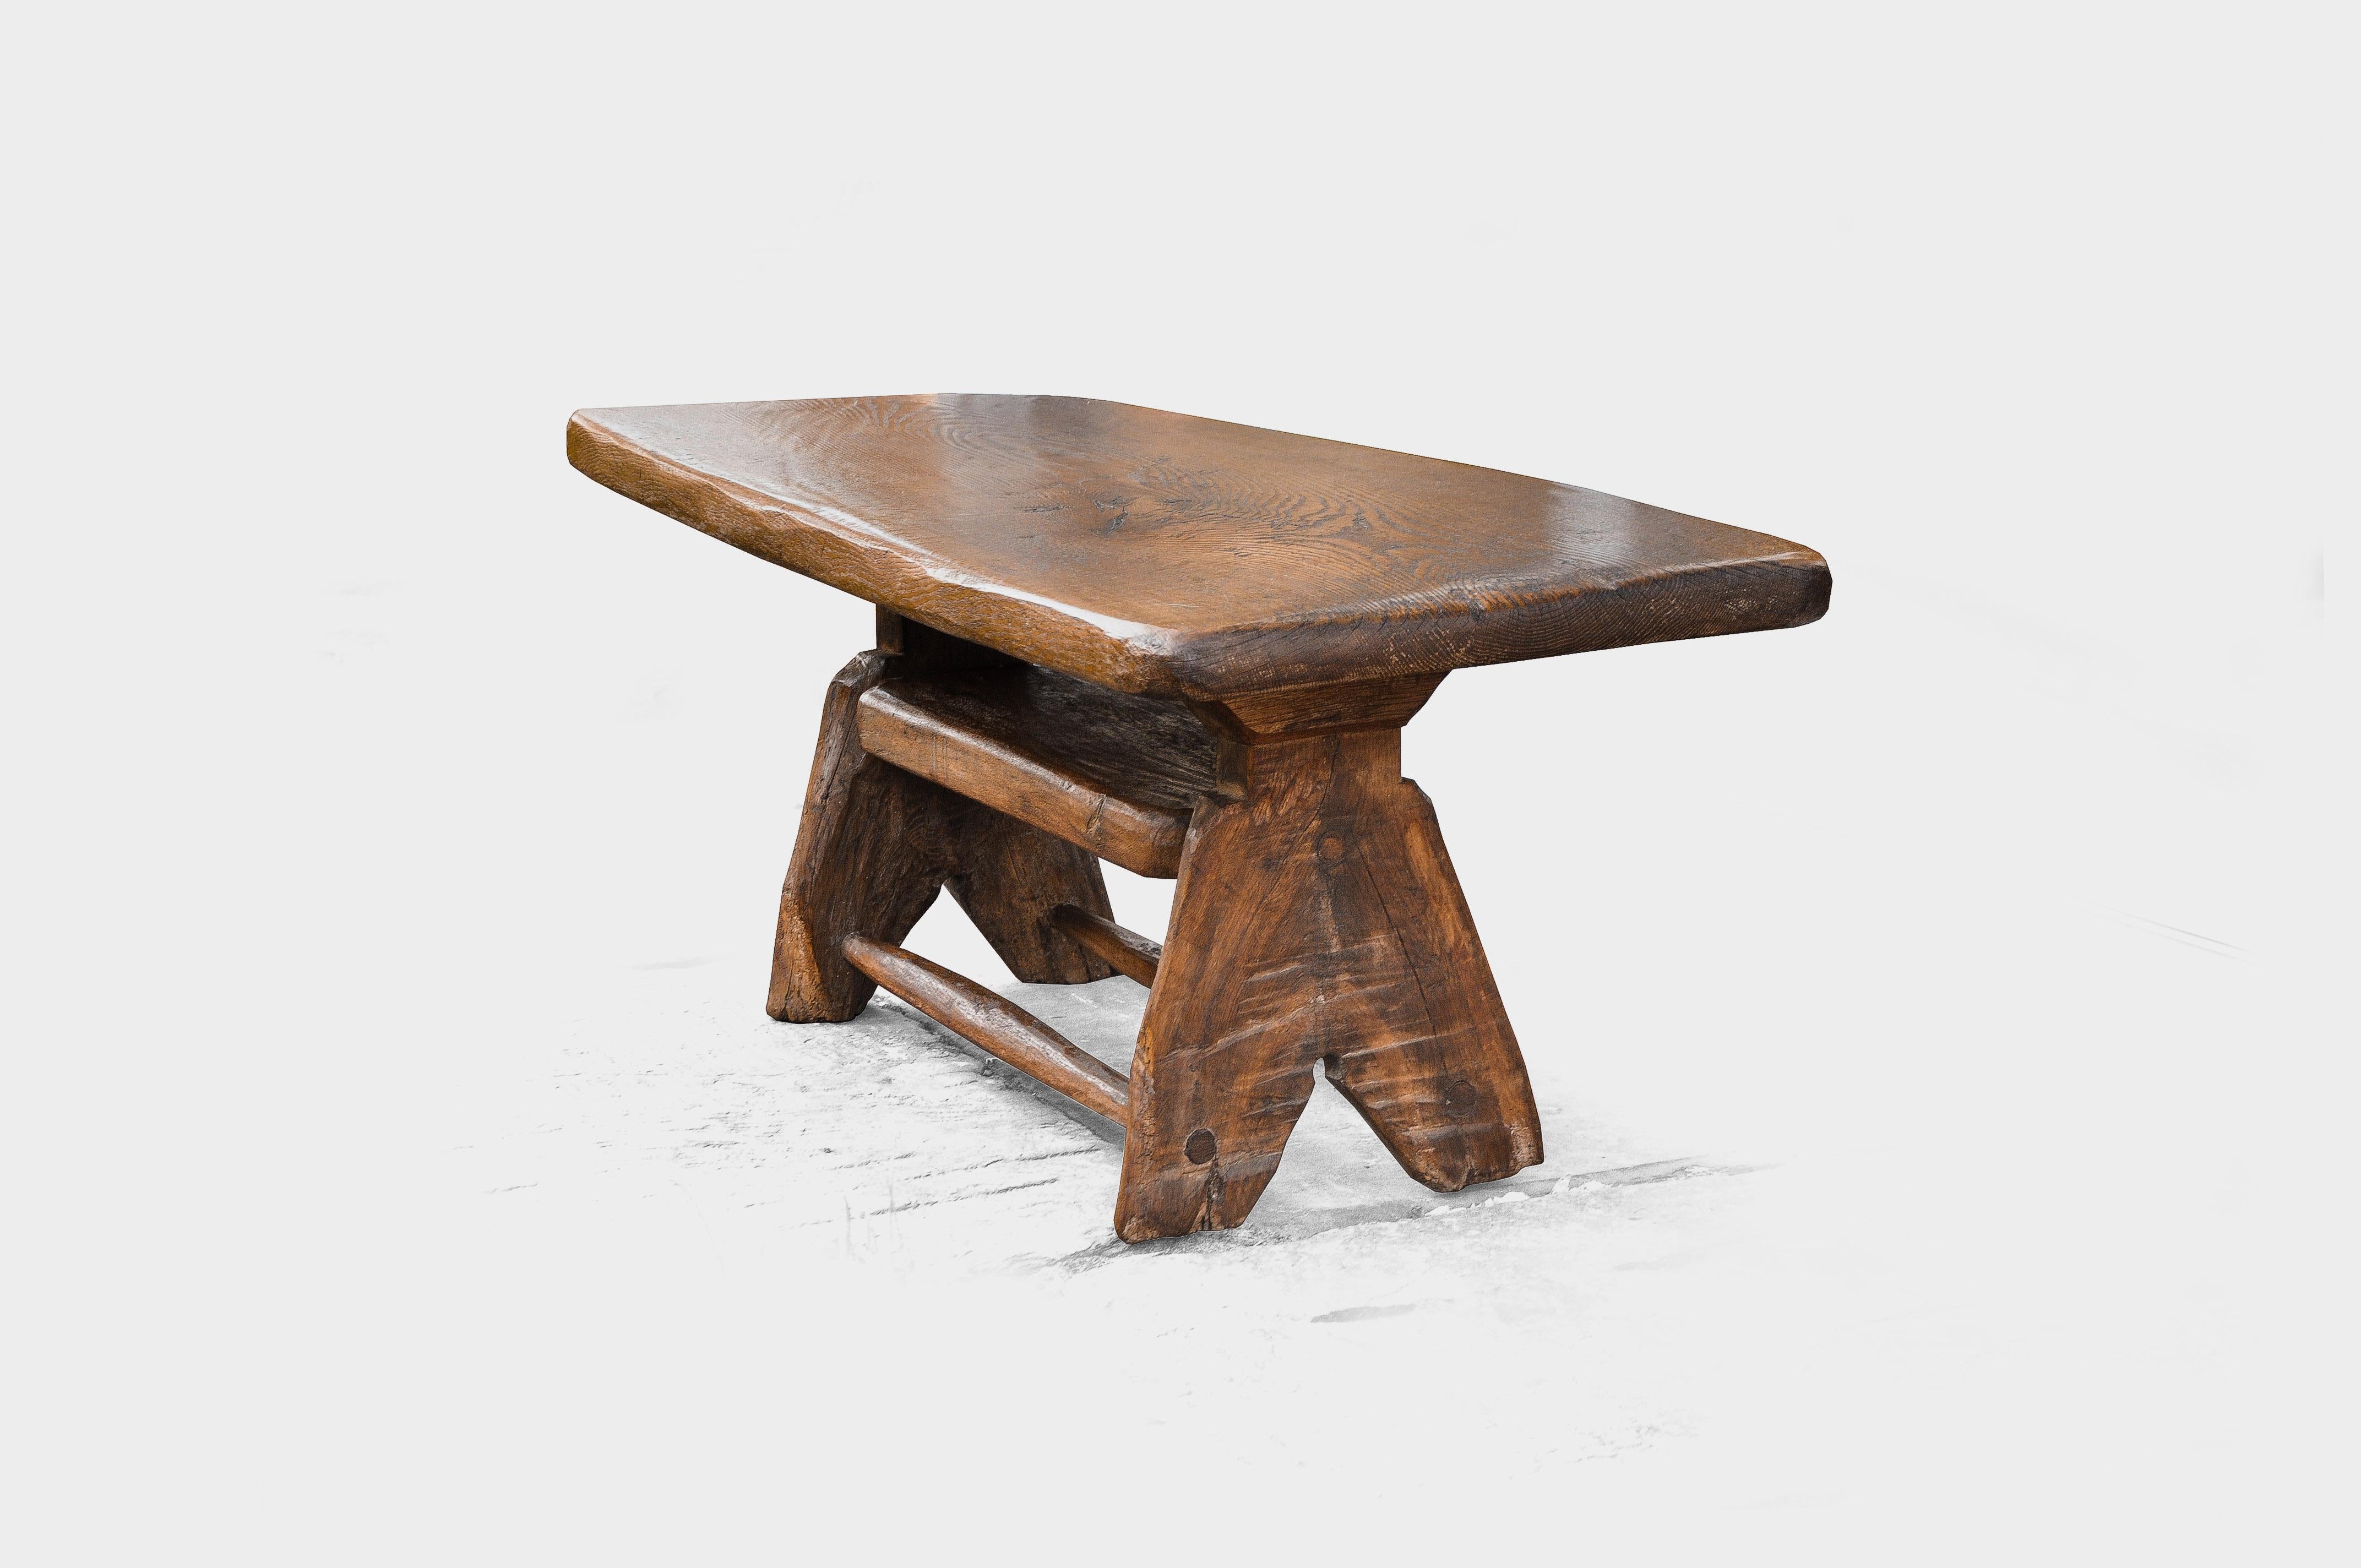 Brutalistic, handmade table made of stained oak, with a 5 cm thick solid oak leaf made of a single piece of unglued wood. On the underside there is a shelf and two carved cross struts, which give the table the necessary stability to also be used as